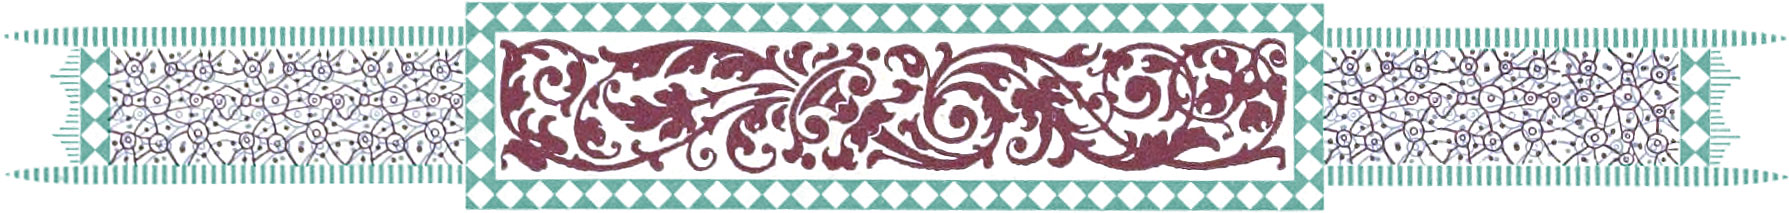 Ornate border comprising purple and teal colors